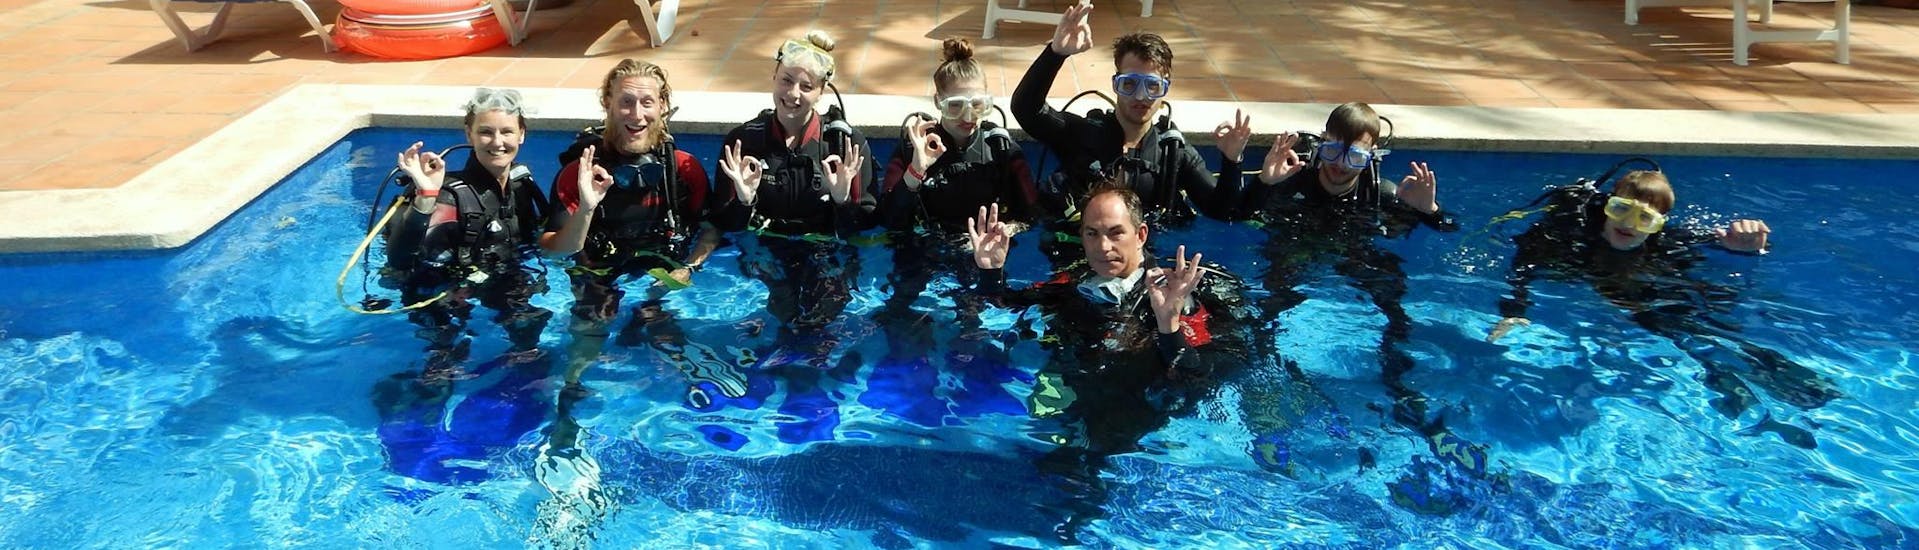 The participants of the PADI Open Water Diver Course in Portocolom are practicing the basics of diving in the East Coast Divers Mallorca practice pool.